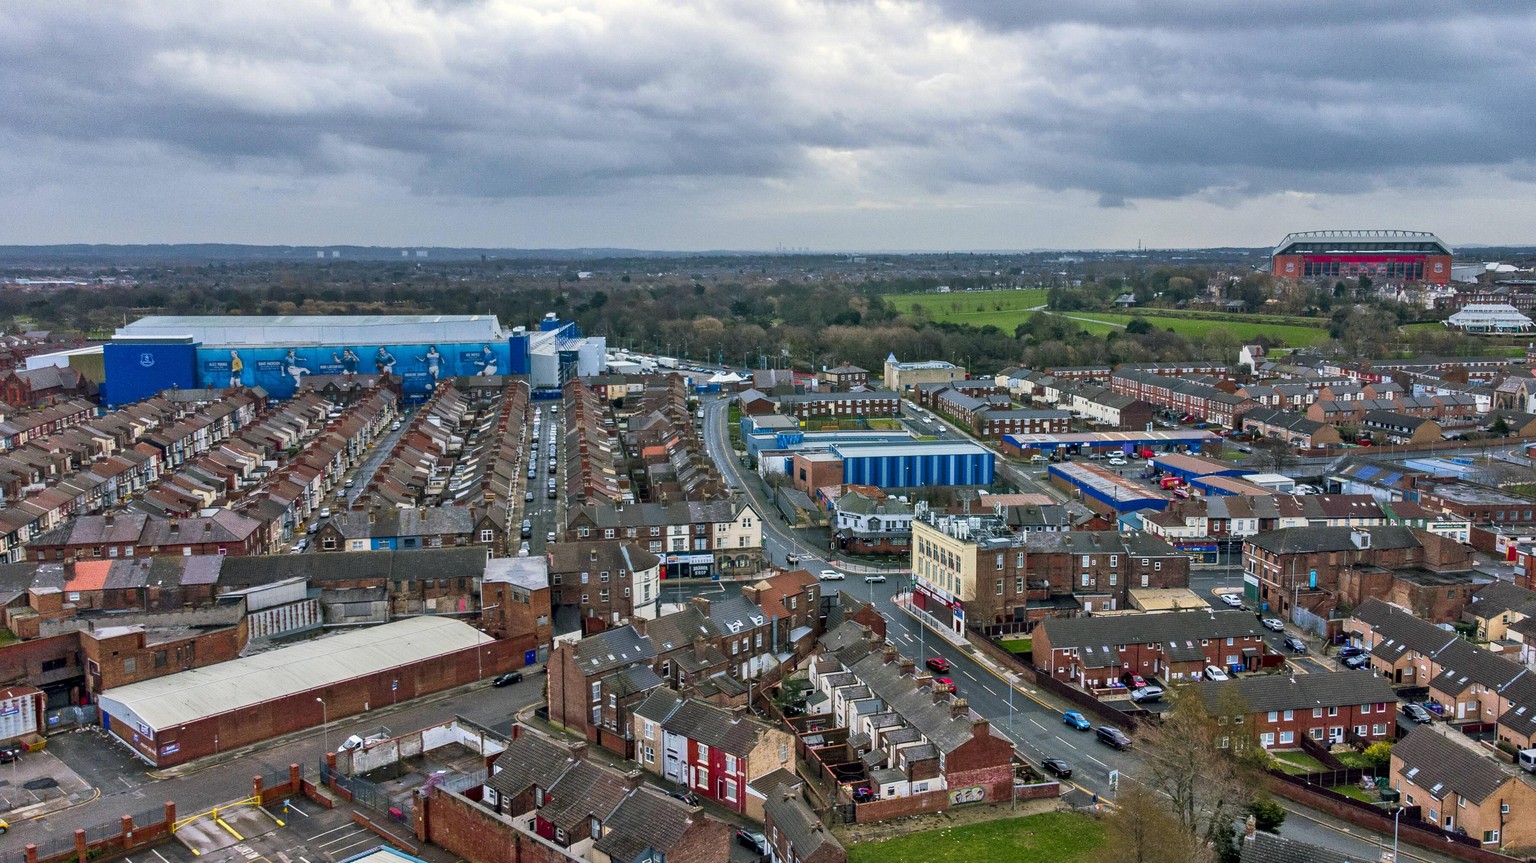 IMAGO / PA Images

Aerial views of Liverpool A general view of Goodison Park, home of Everton Football Club with Anfield, home of Liverpool Football Club (right) in the distance. Issue date: Tuesday F ...